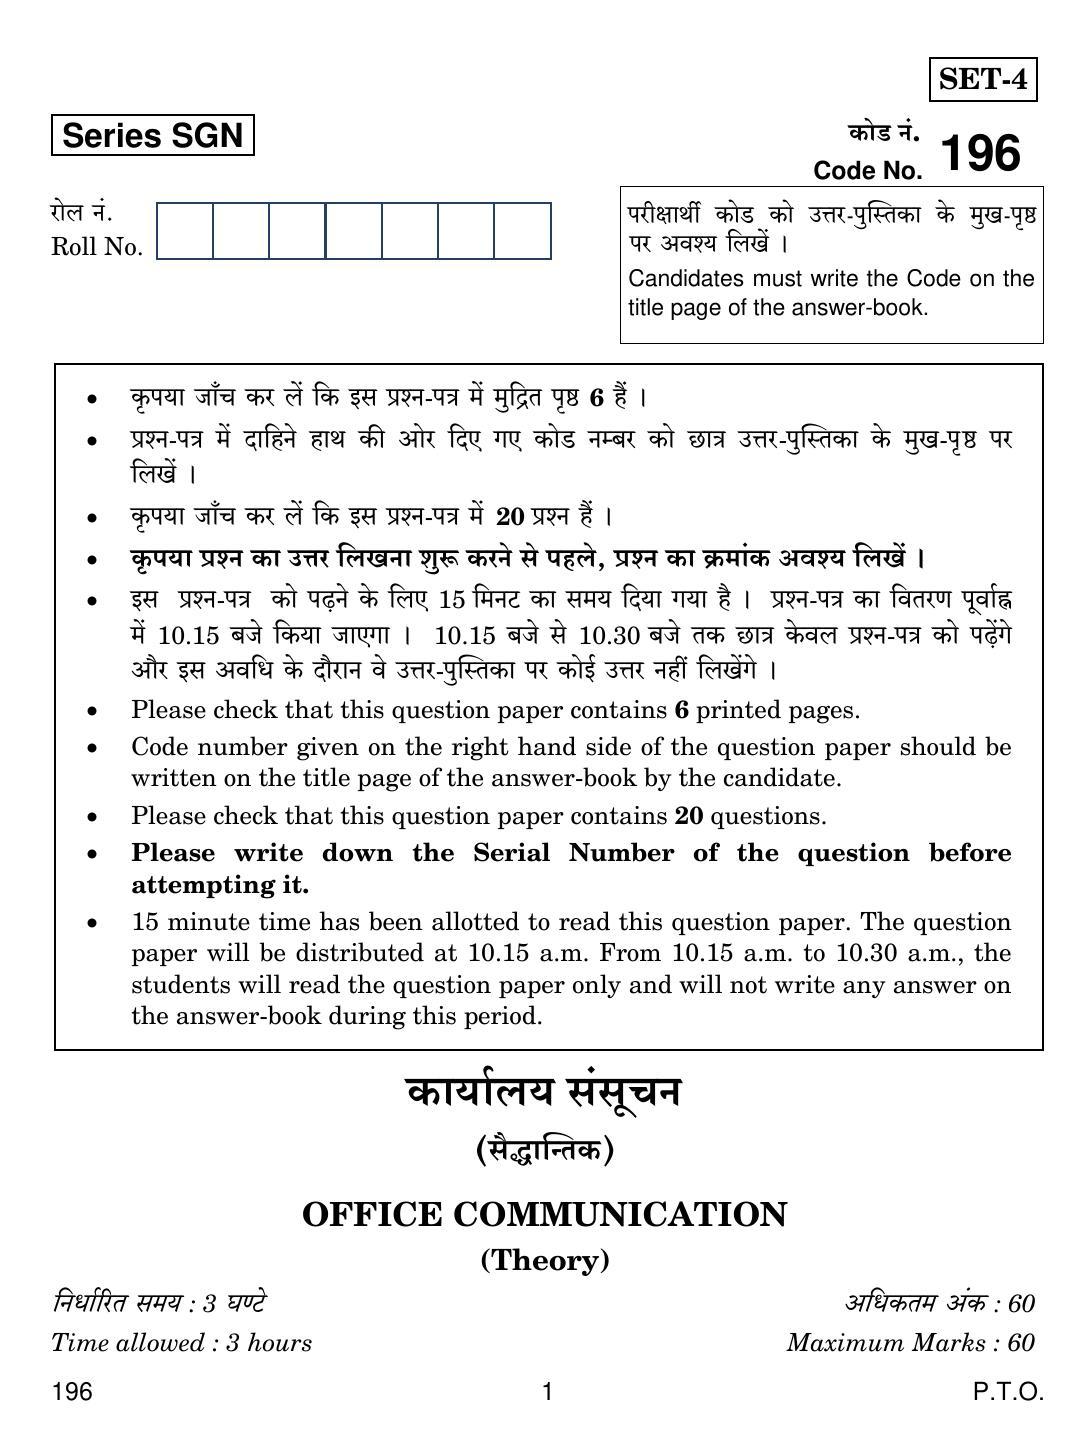 CBSE Class 12 196 OFFICE COMMUNICATION 2018 Question Paper - Page 1